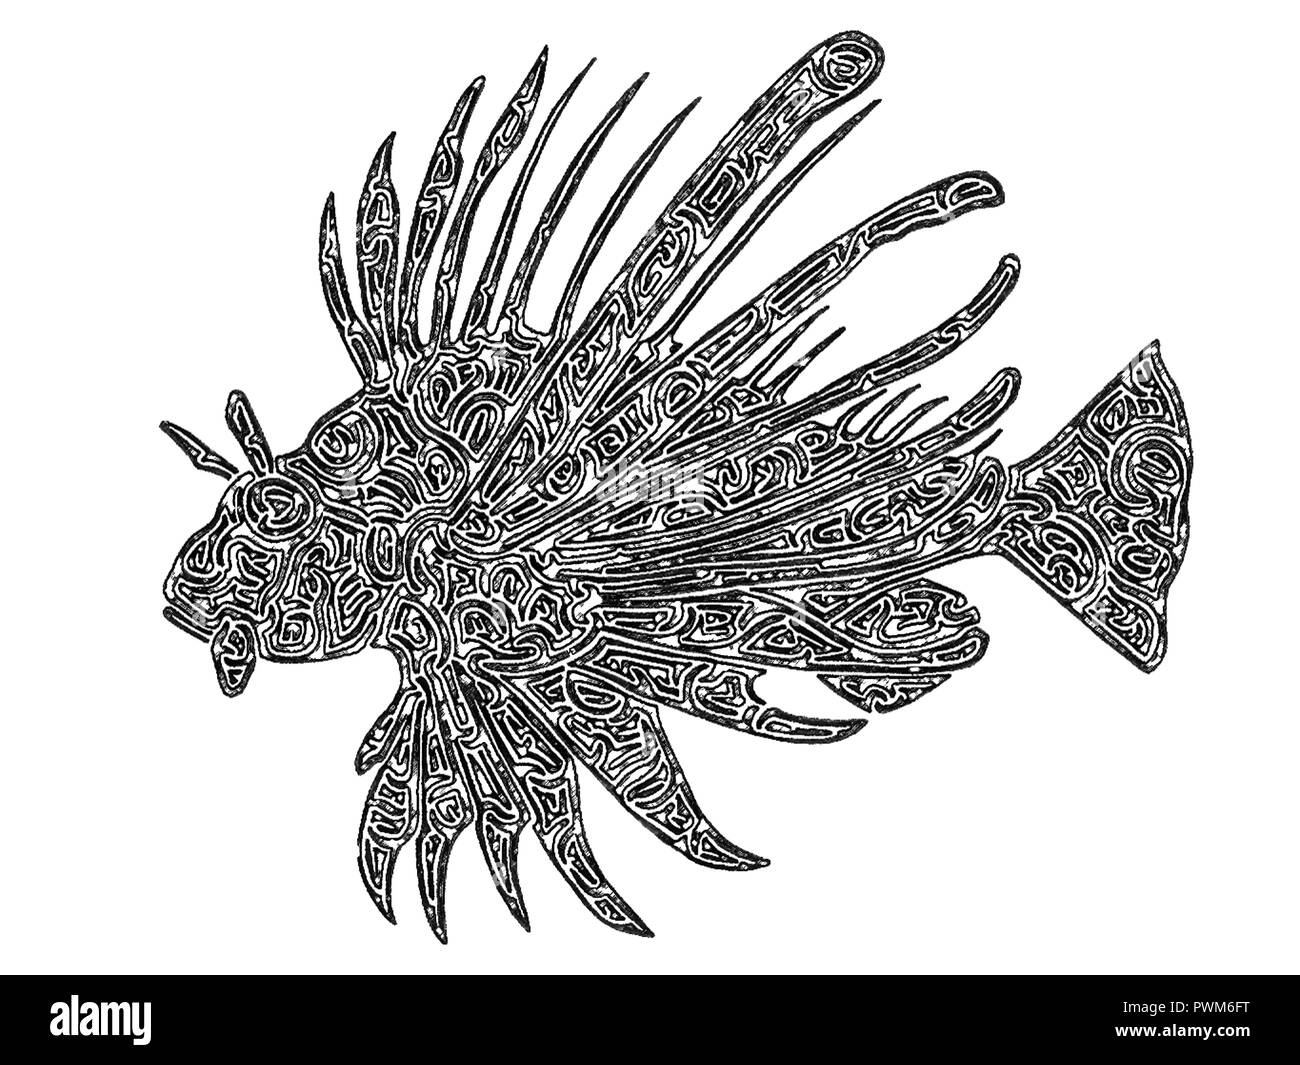 Lionfish Black And White Stock Photos Images Alamy Shark, turtle, eel, octopus, seal, narwhal: https www alamy com illustration of lionfish black and white drawing maze lines image222335004 html